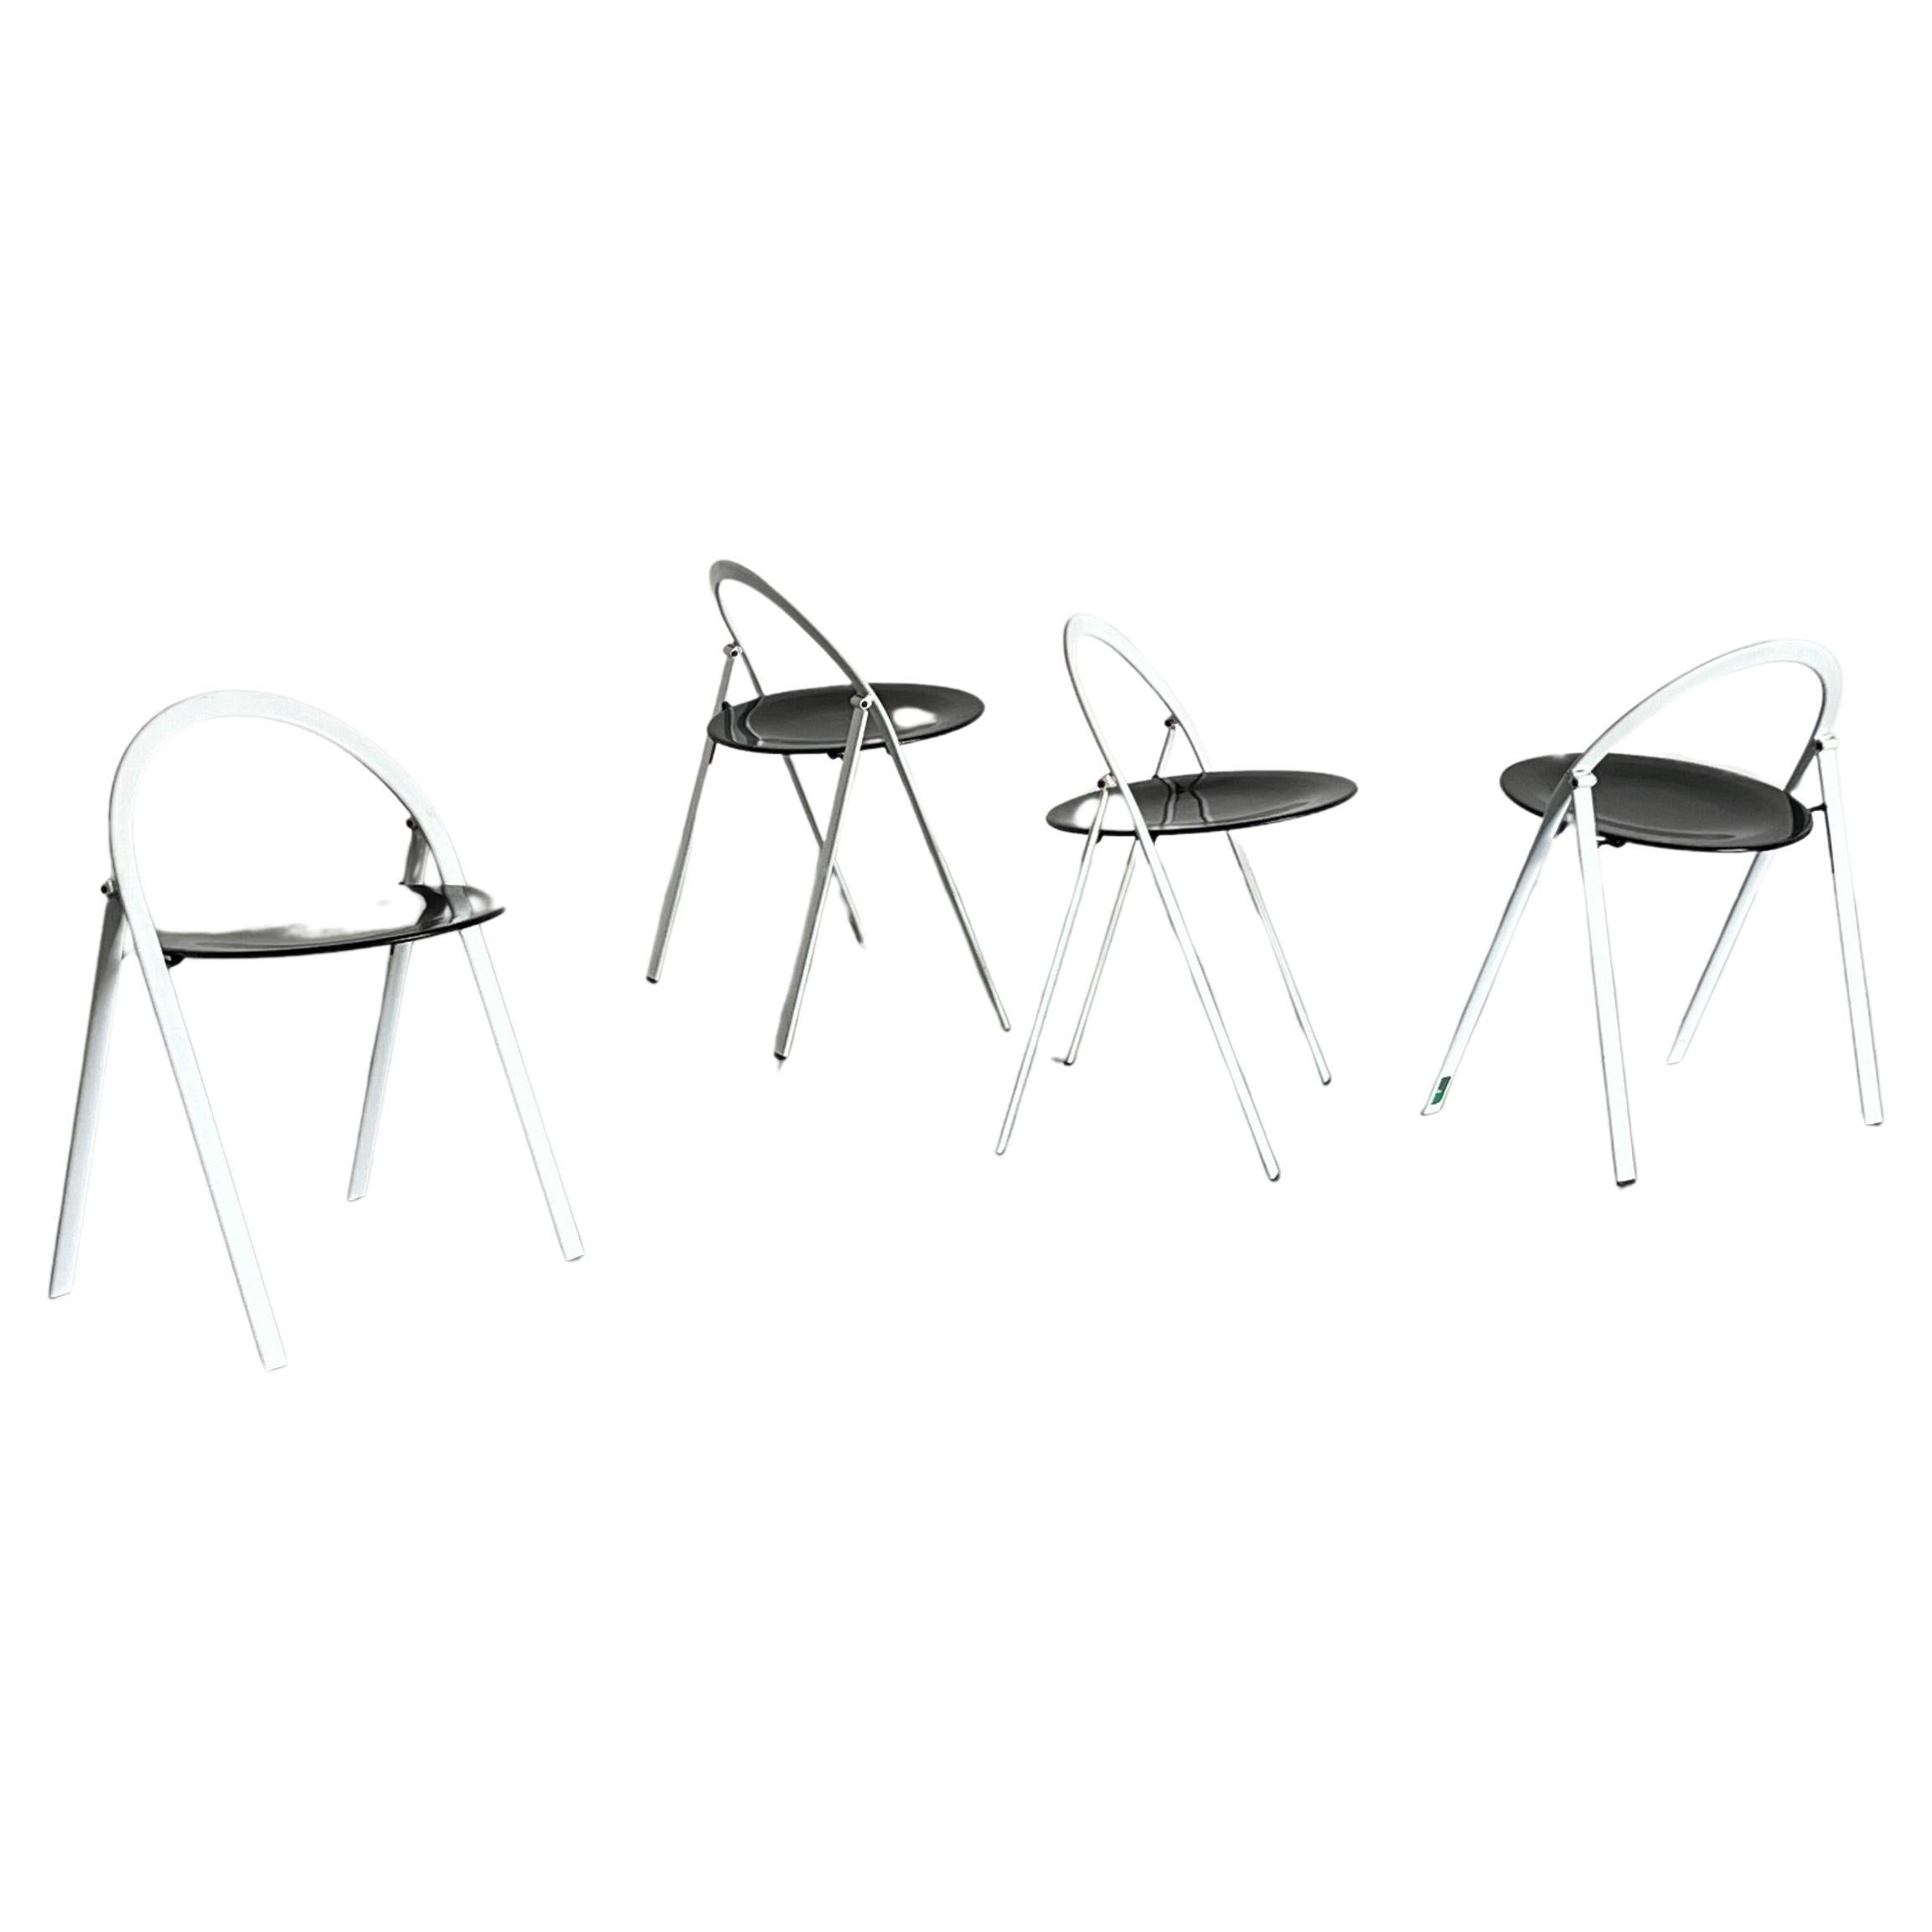 Set of 4 Postmodern Sculptural Folding Chairs by Giorgio Cattelan for Cidue, 70s